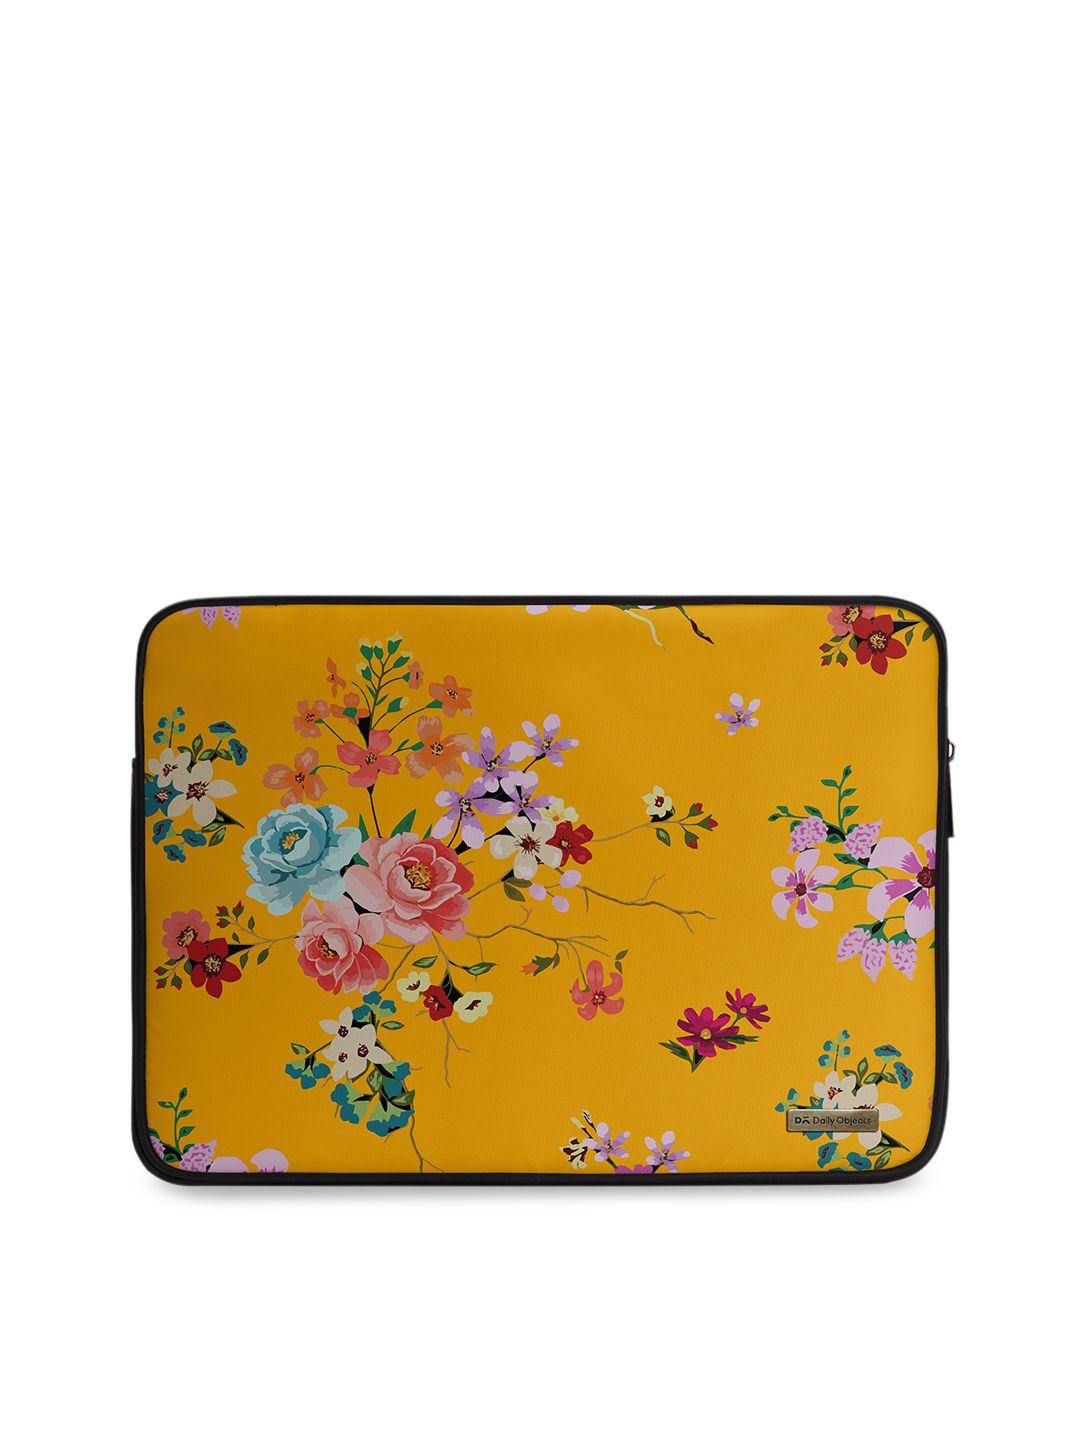 dailyobjects-unisex-mustard-yellow-floral-printed-13-inch-laptop-sleeve